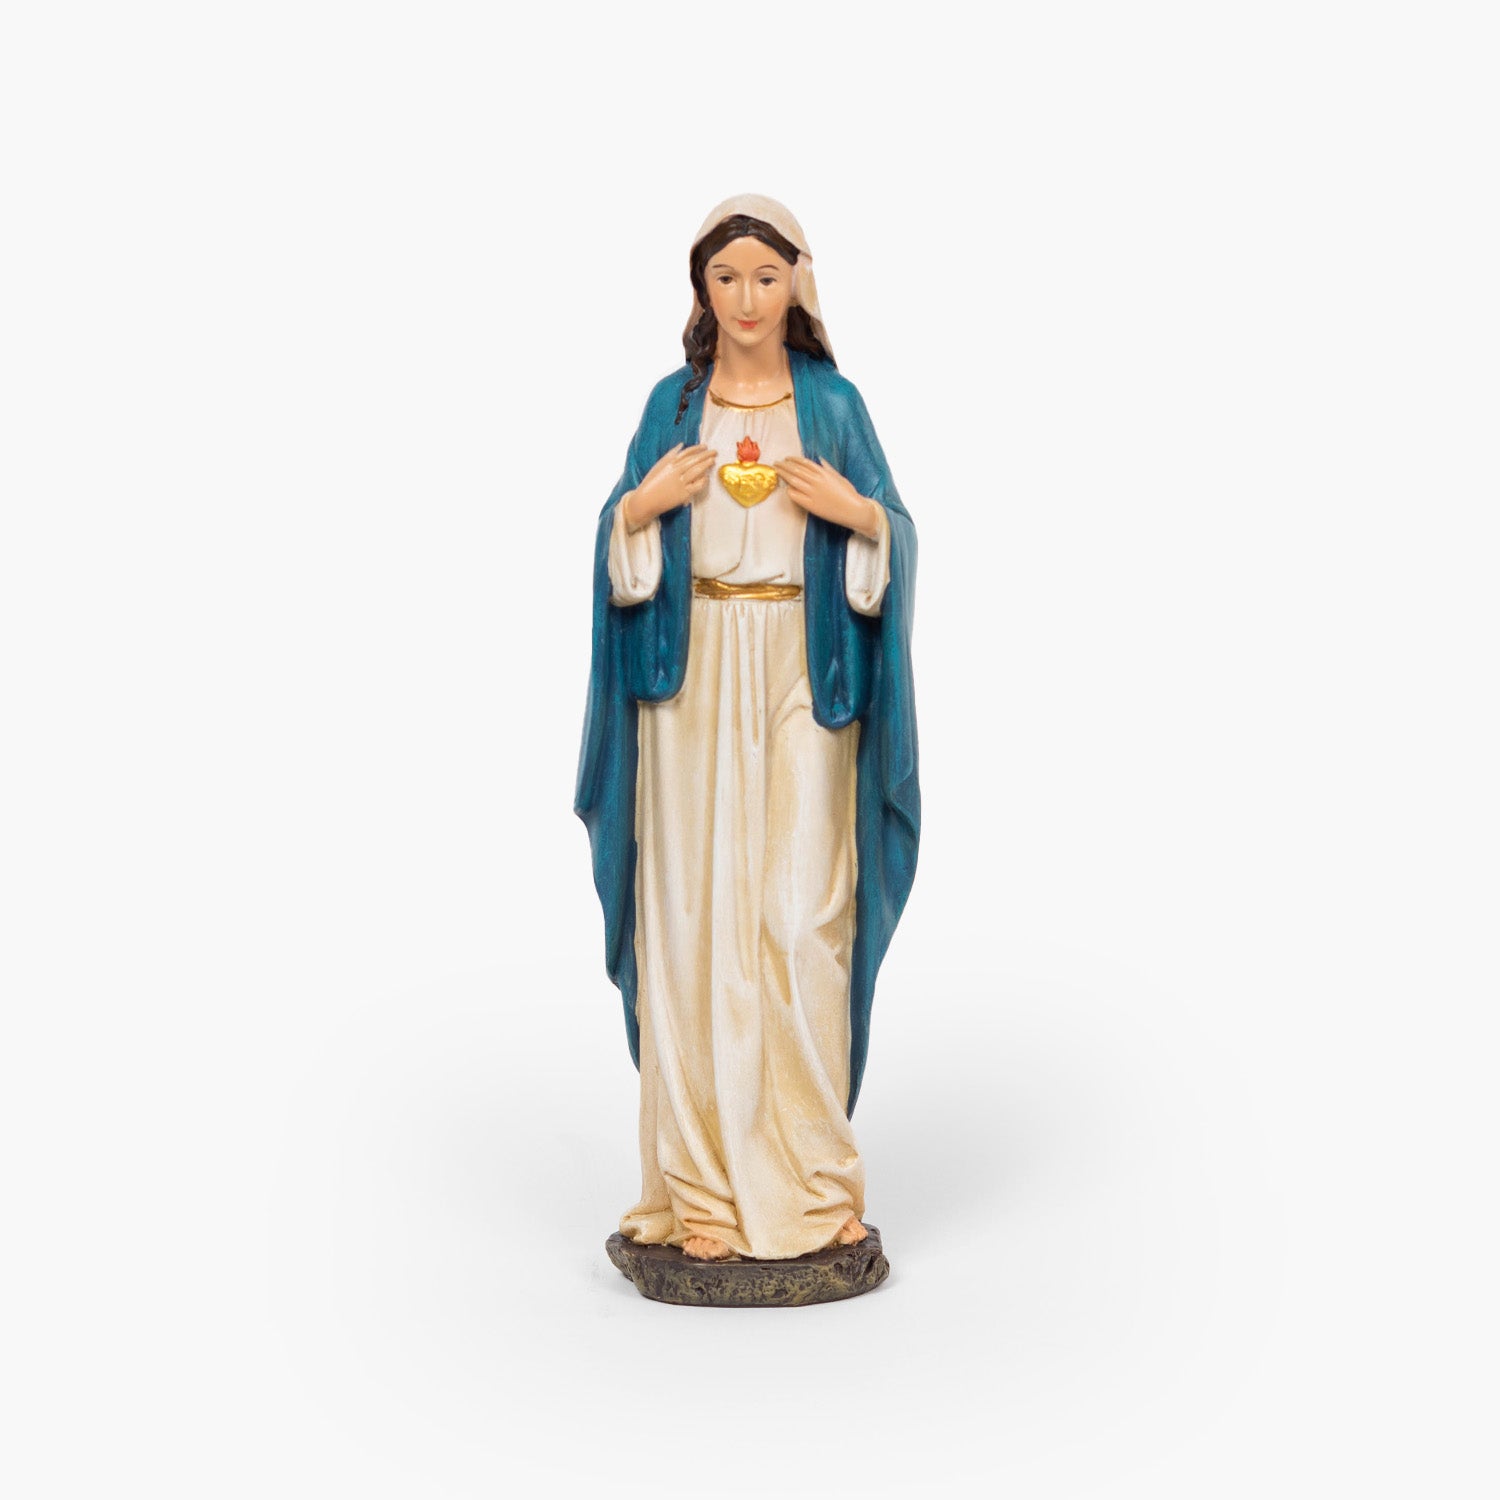 Immaculate Heart of Mary 9.7" Statue